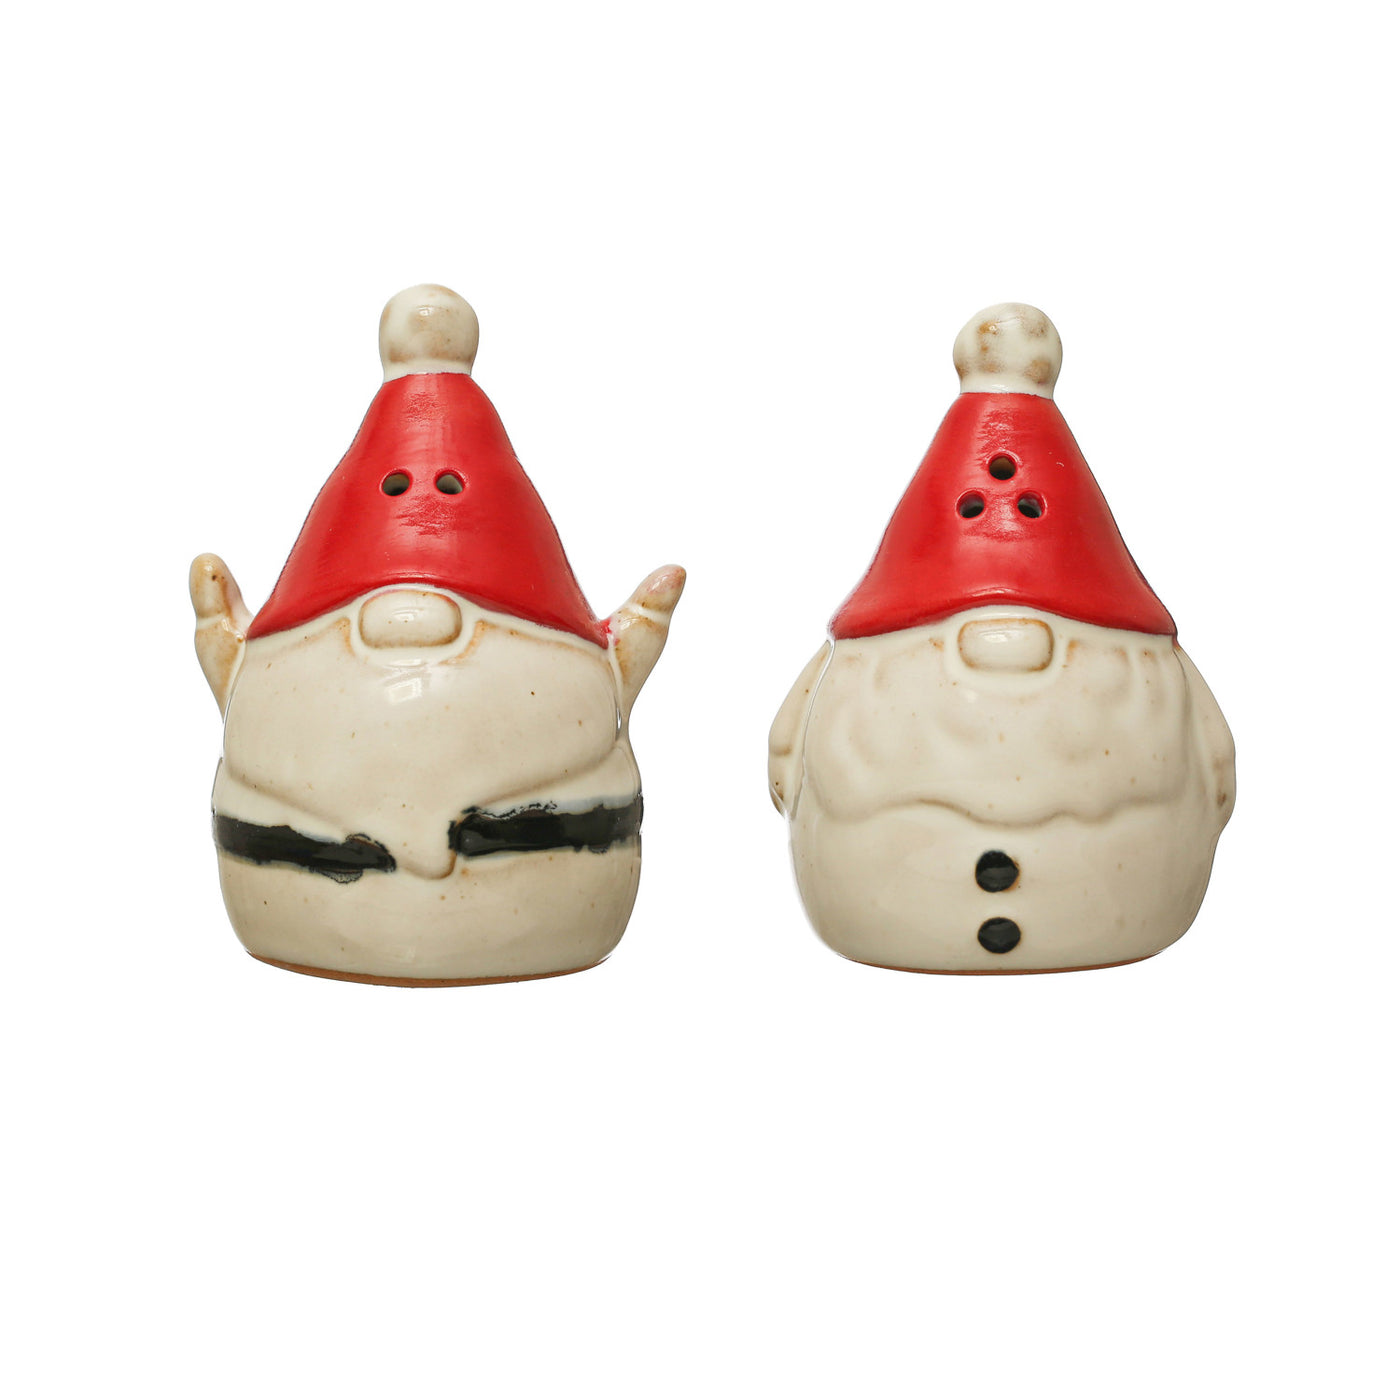 Hand-Painted Stoneware Gnome Salt & Pepper Shakers